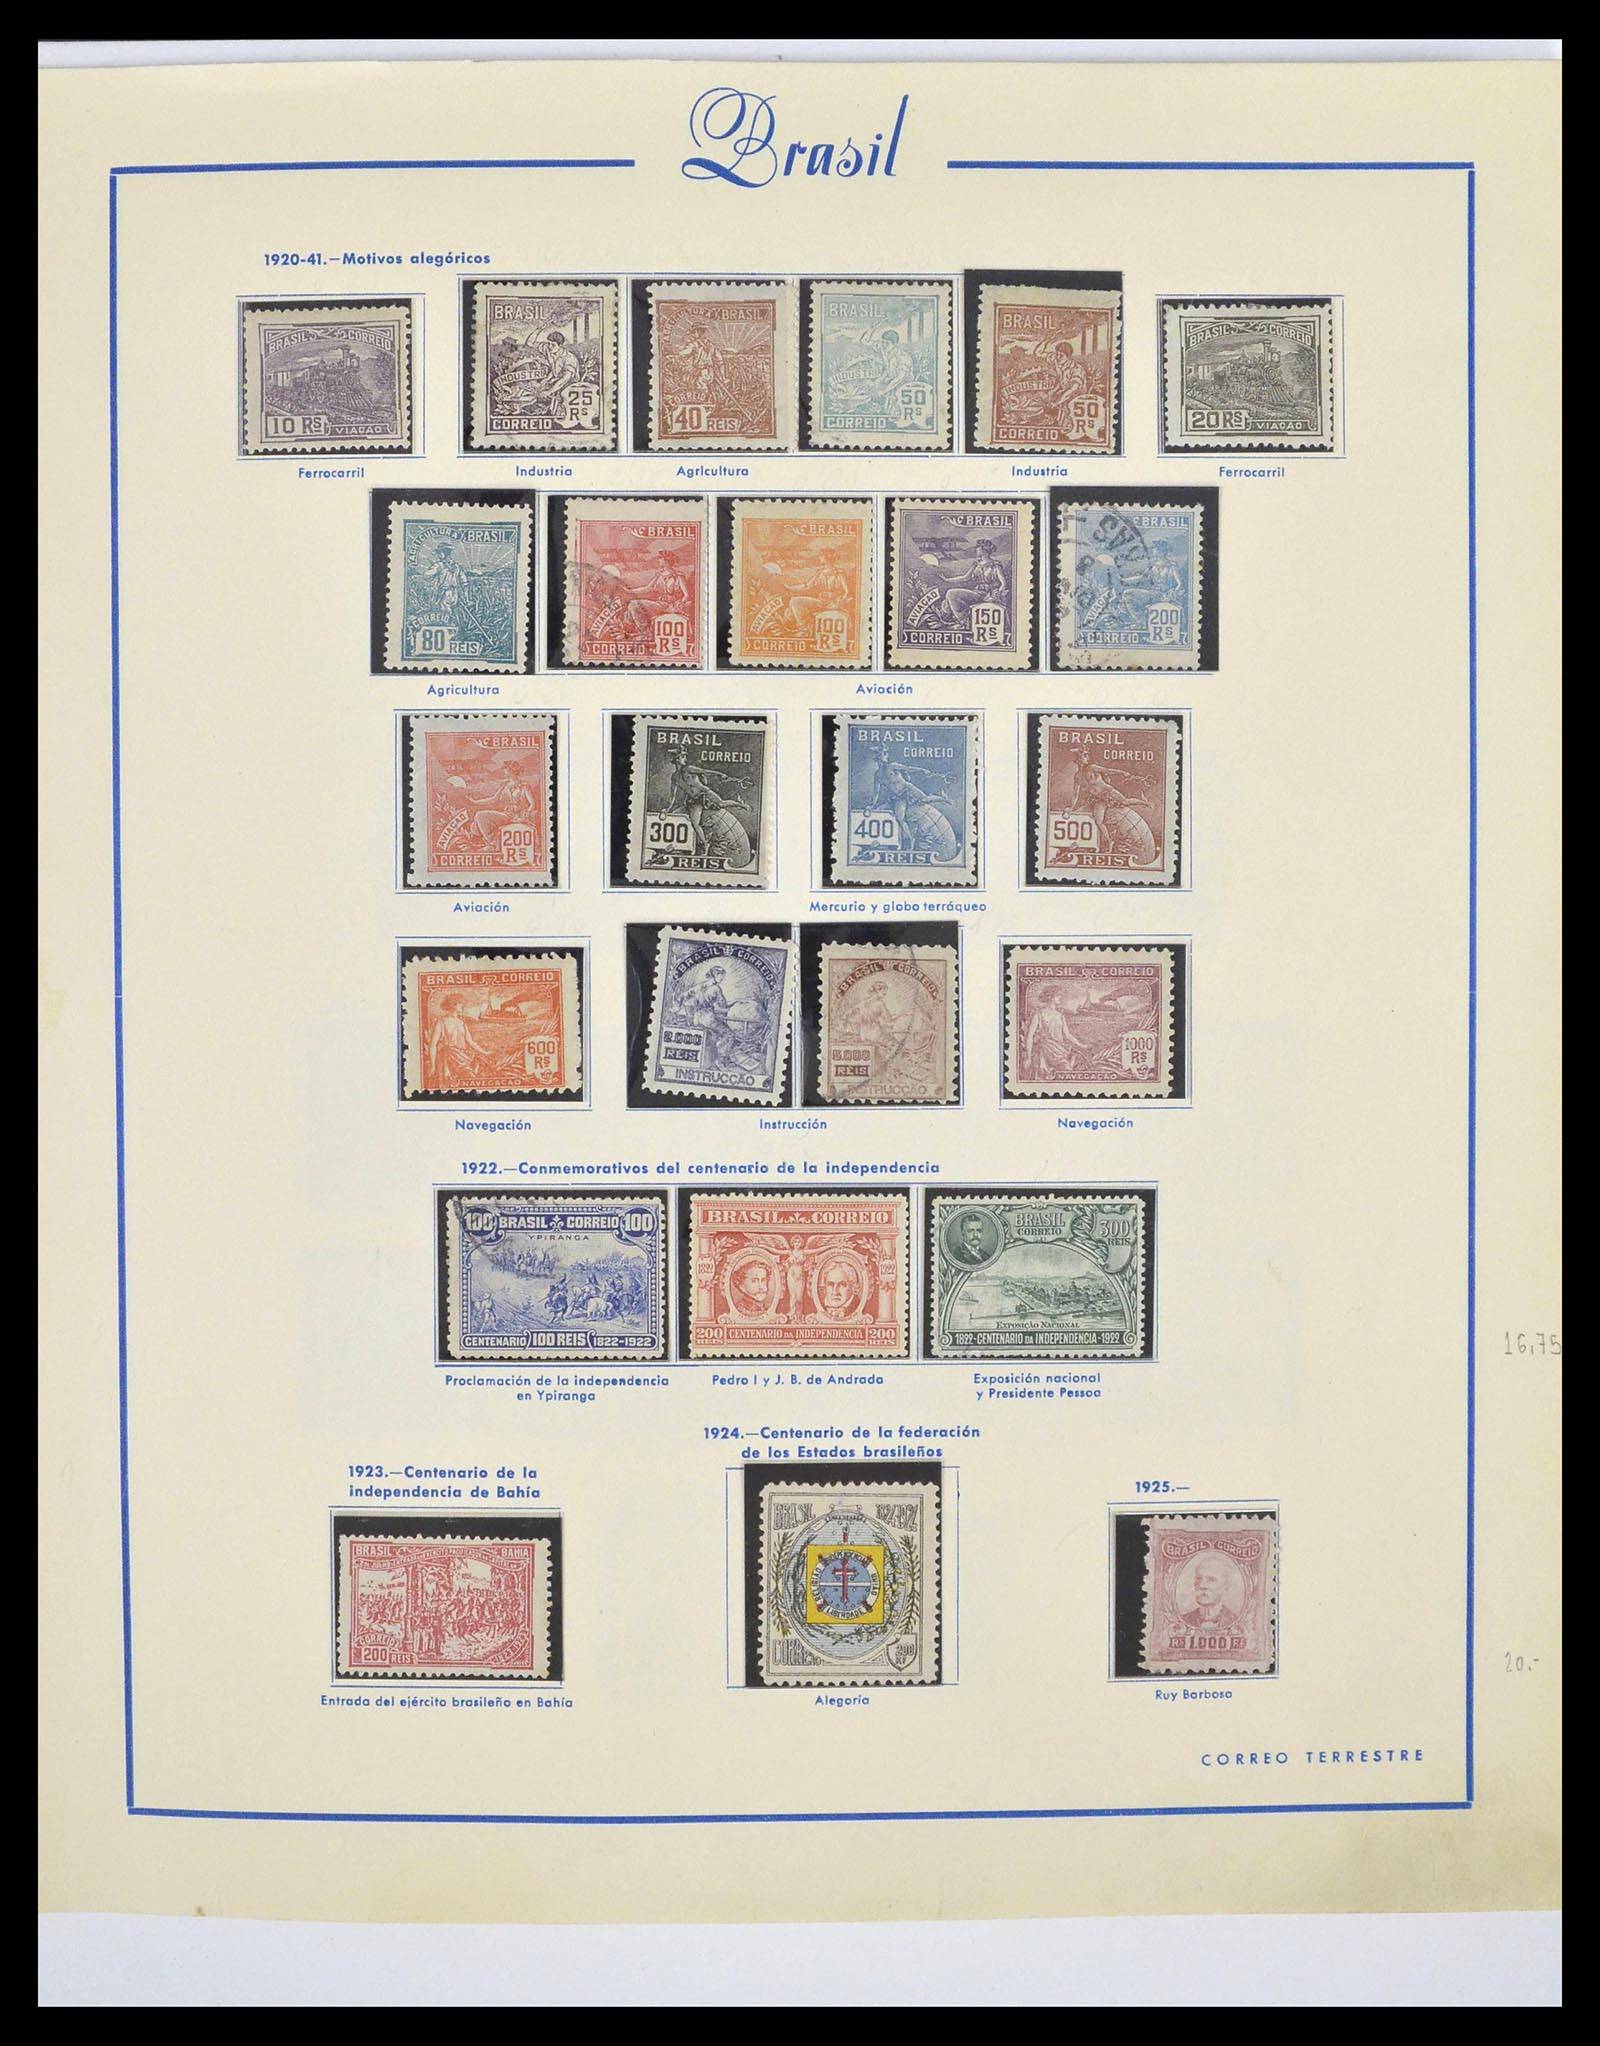 39245 0009 - Stamp collection 39245 Brazil 1843-1968.